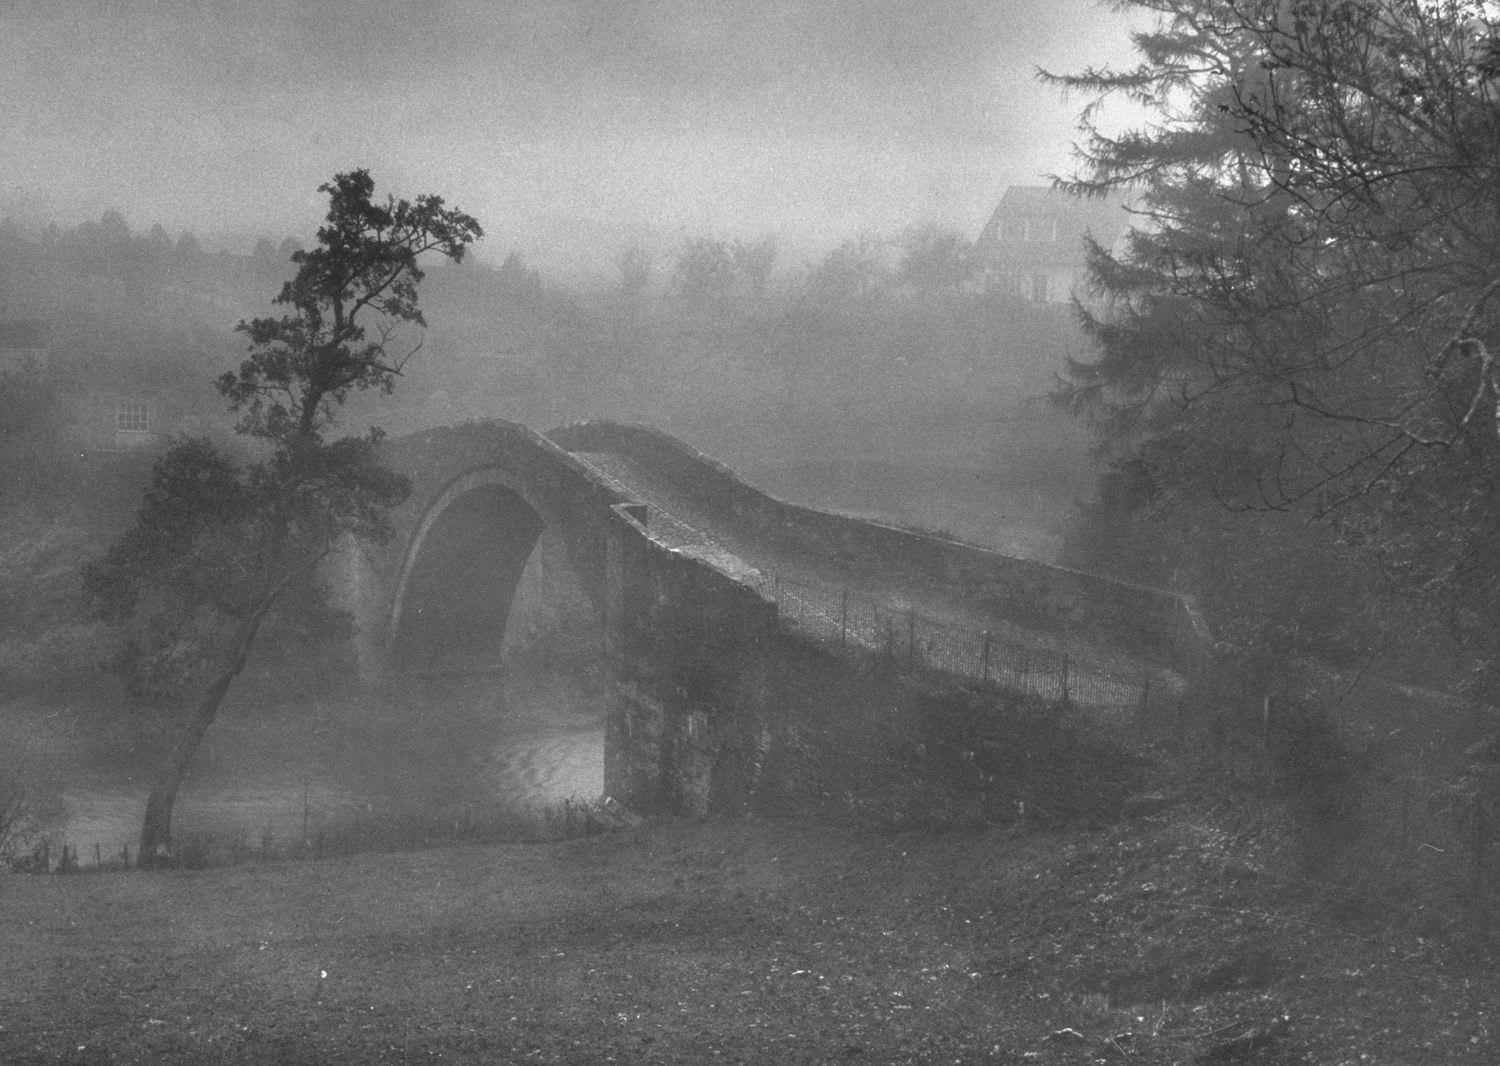 The Old Bridge of Doon ("Brig o' Doon") where Tam O'Shanter was saved from a witch in a poem by Robert Burns, 1948.